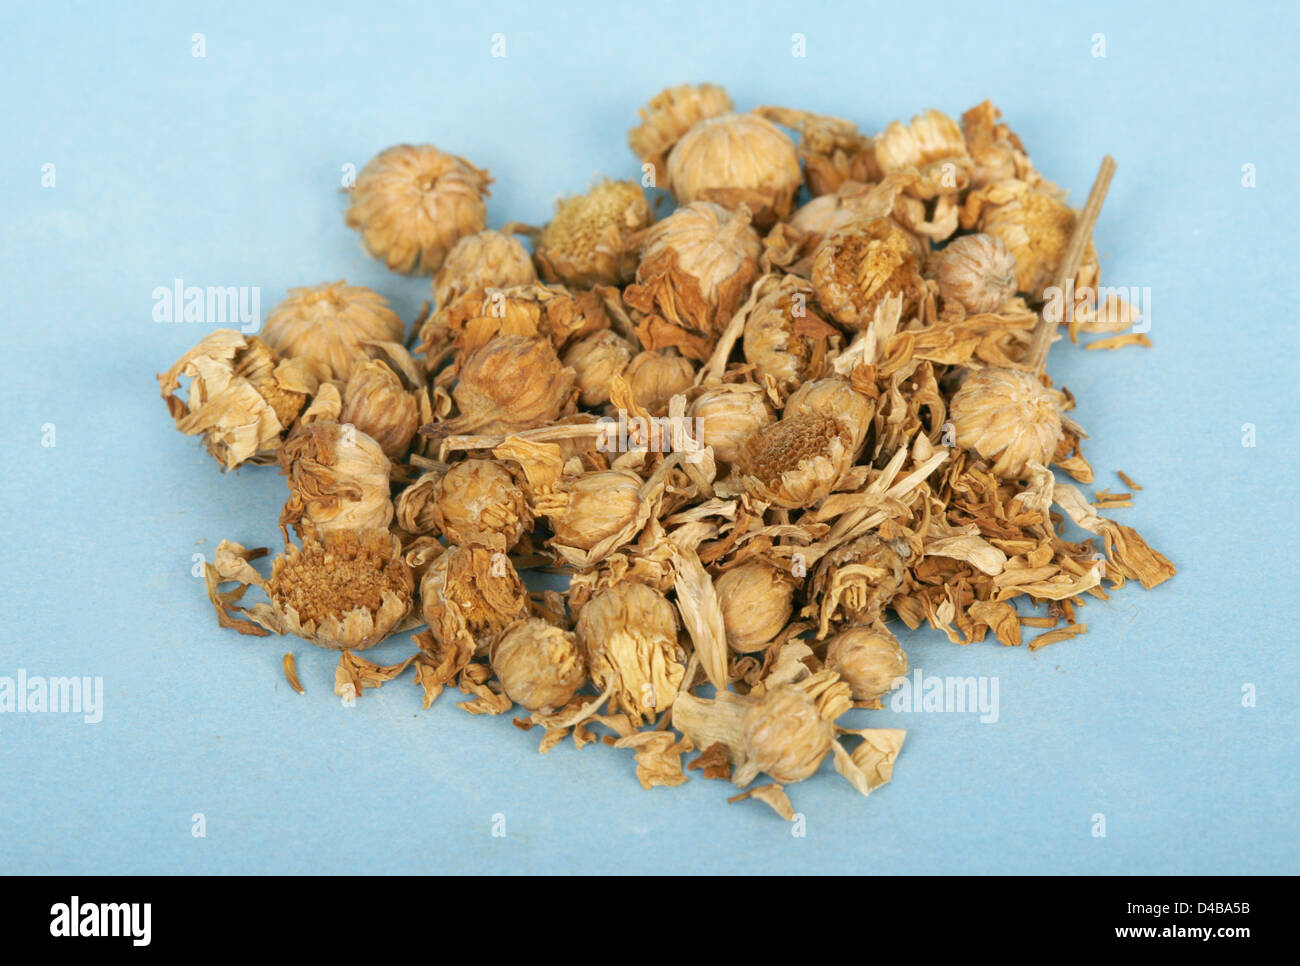 Pyrethrum flowers are dried and crust into power for use as insect repellent and insecticide. Stock Photo